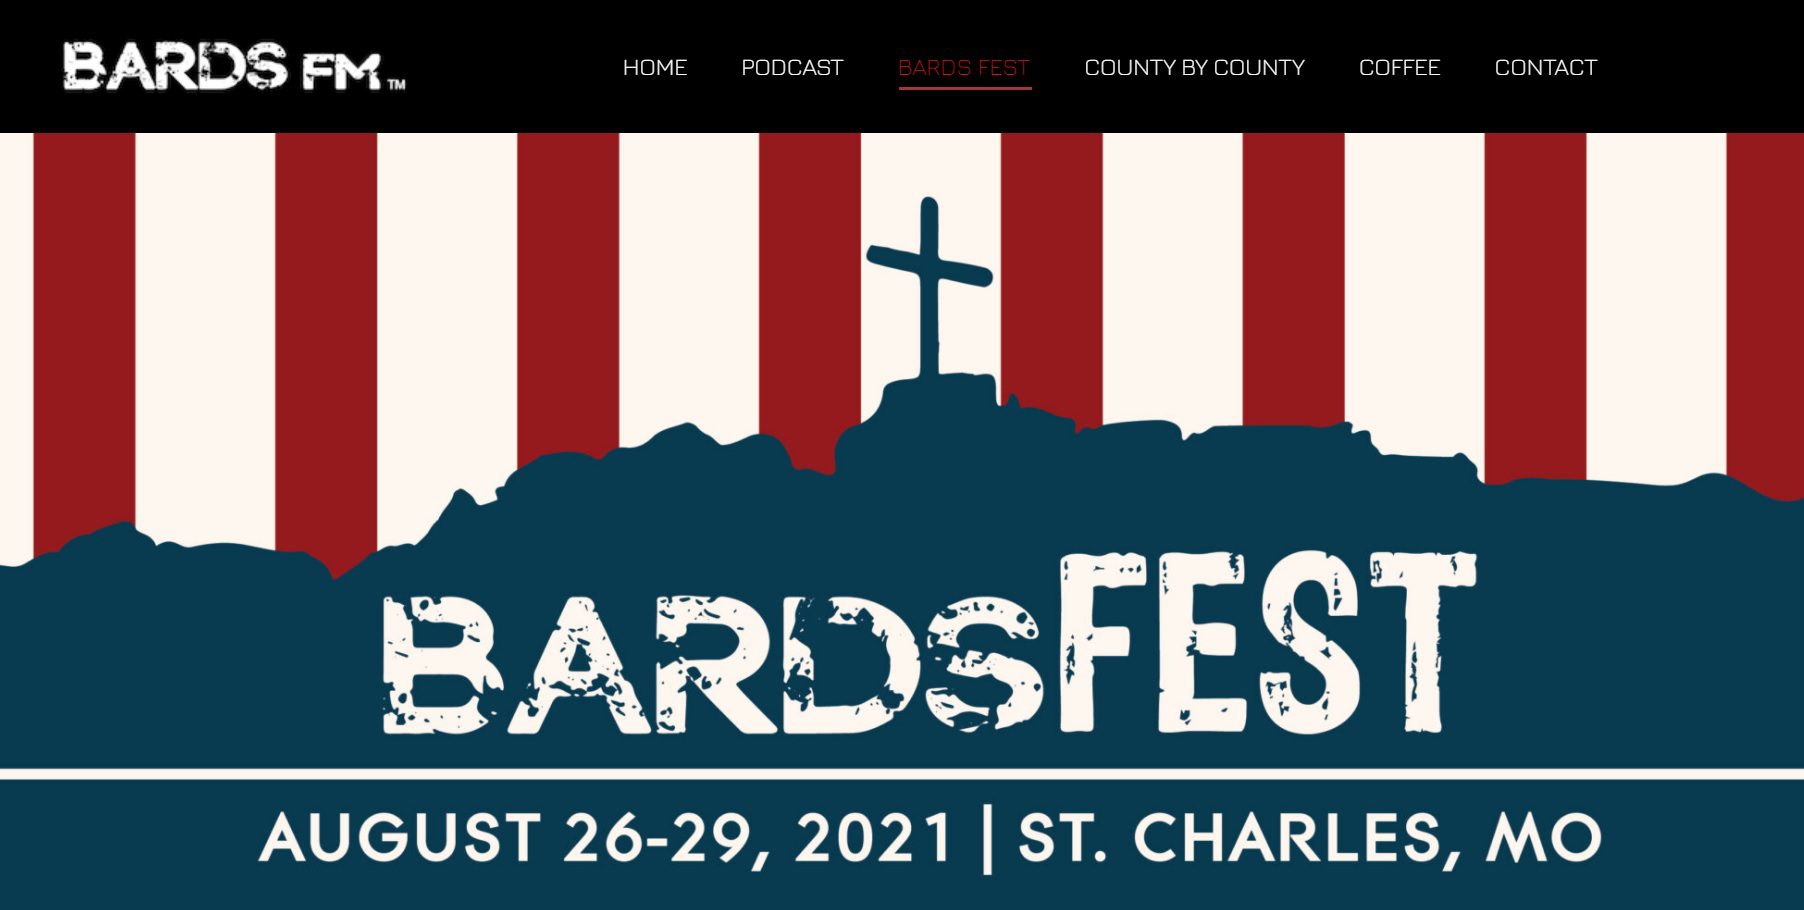 Event Bright Cancels and Refunds Tickets to Upcoming Christian Event 'BARDSFEST' in St. Louis After Hit Piece by Media Matters - Event Will Go On | The Gateway Pundit | by Joe Hoft